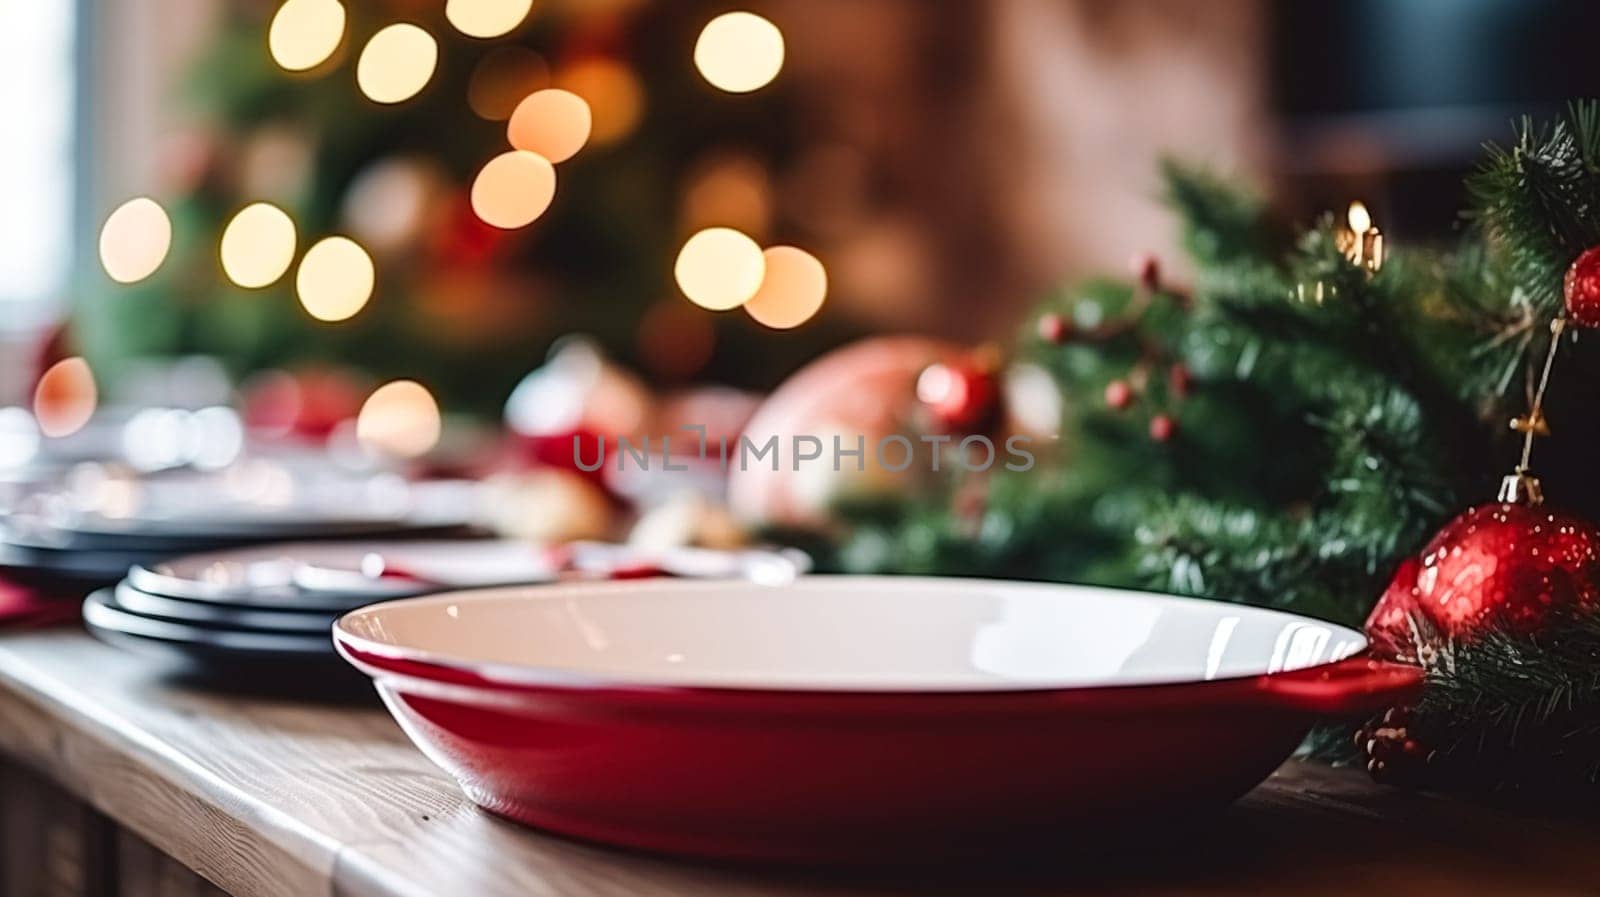 Dishware and crockery set for winter holiday family dinner, Christmas homeware decor for holidays in the English country house, gift set and home styling inspiration